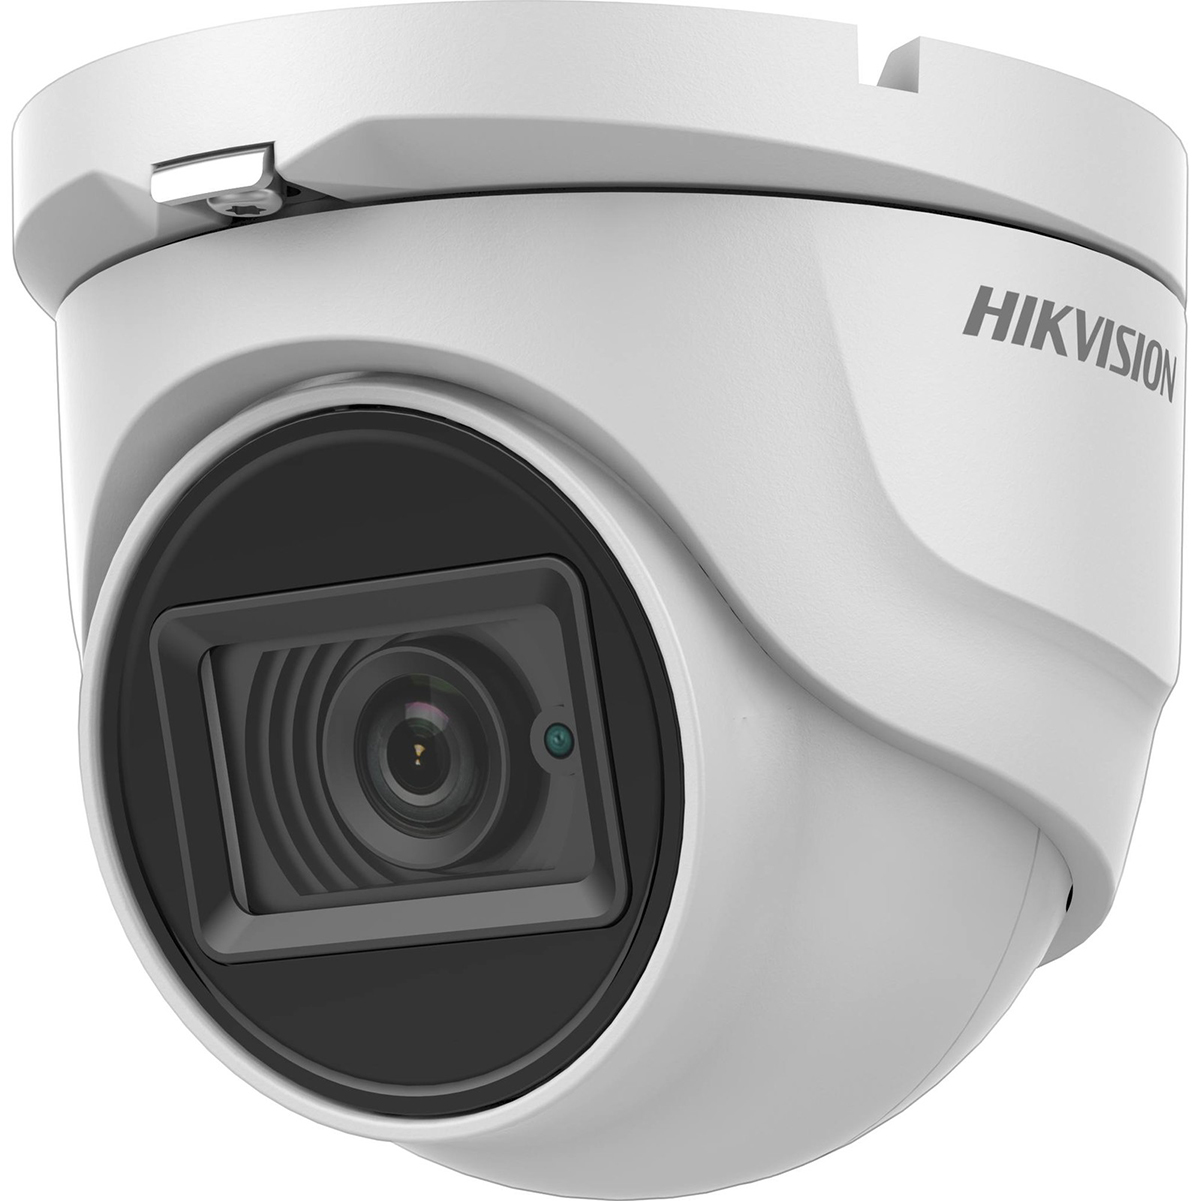 You Recently Viewed Hikvision DS-2CE76U1T-ITMF 8MP External Turret Camera Image